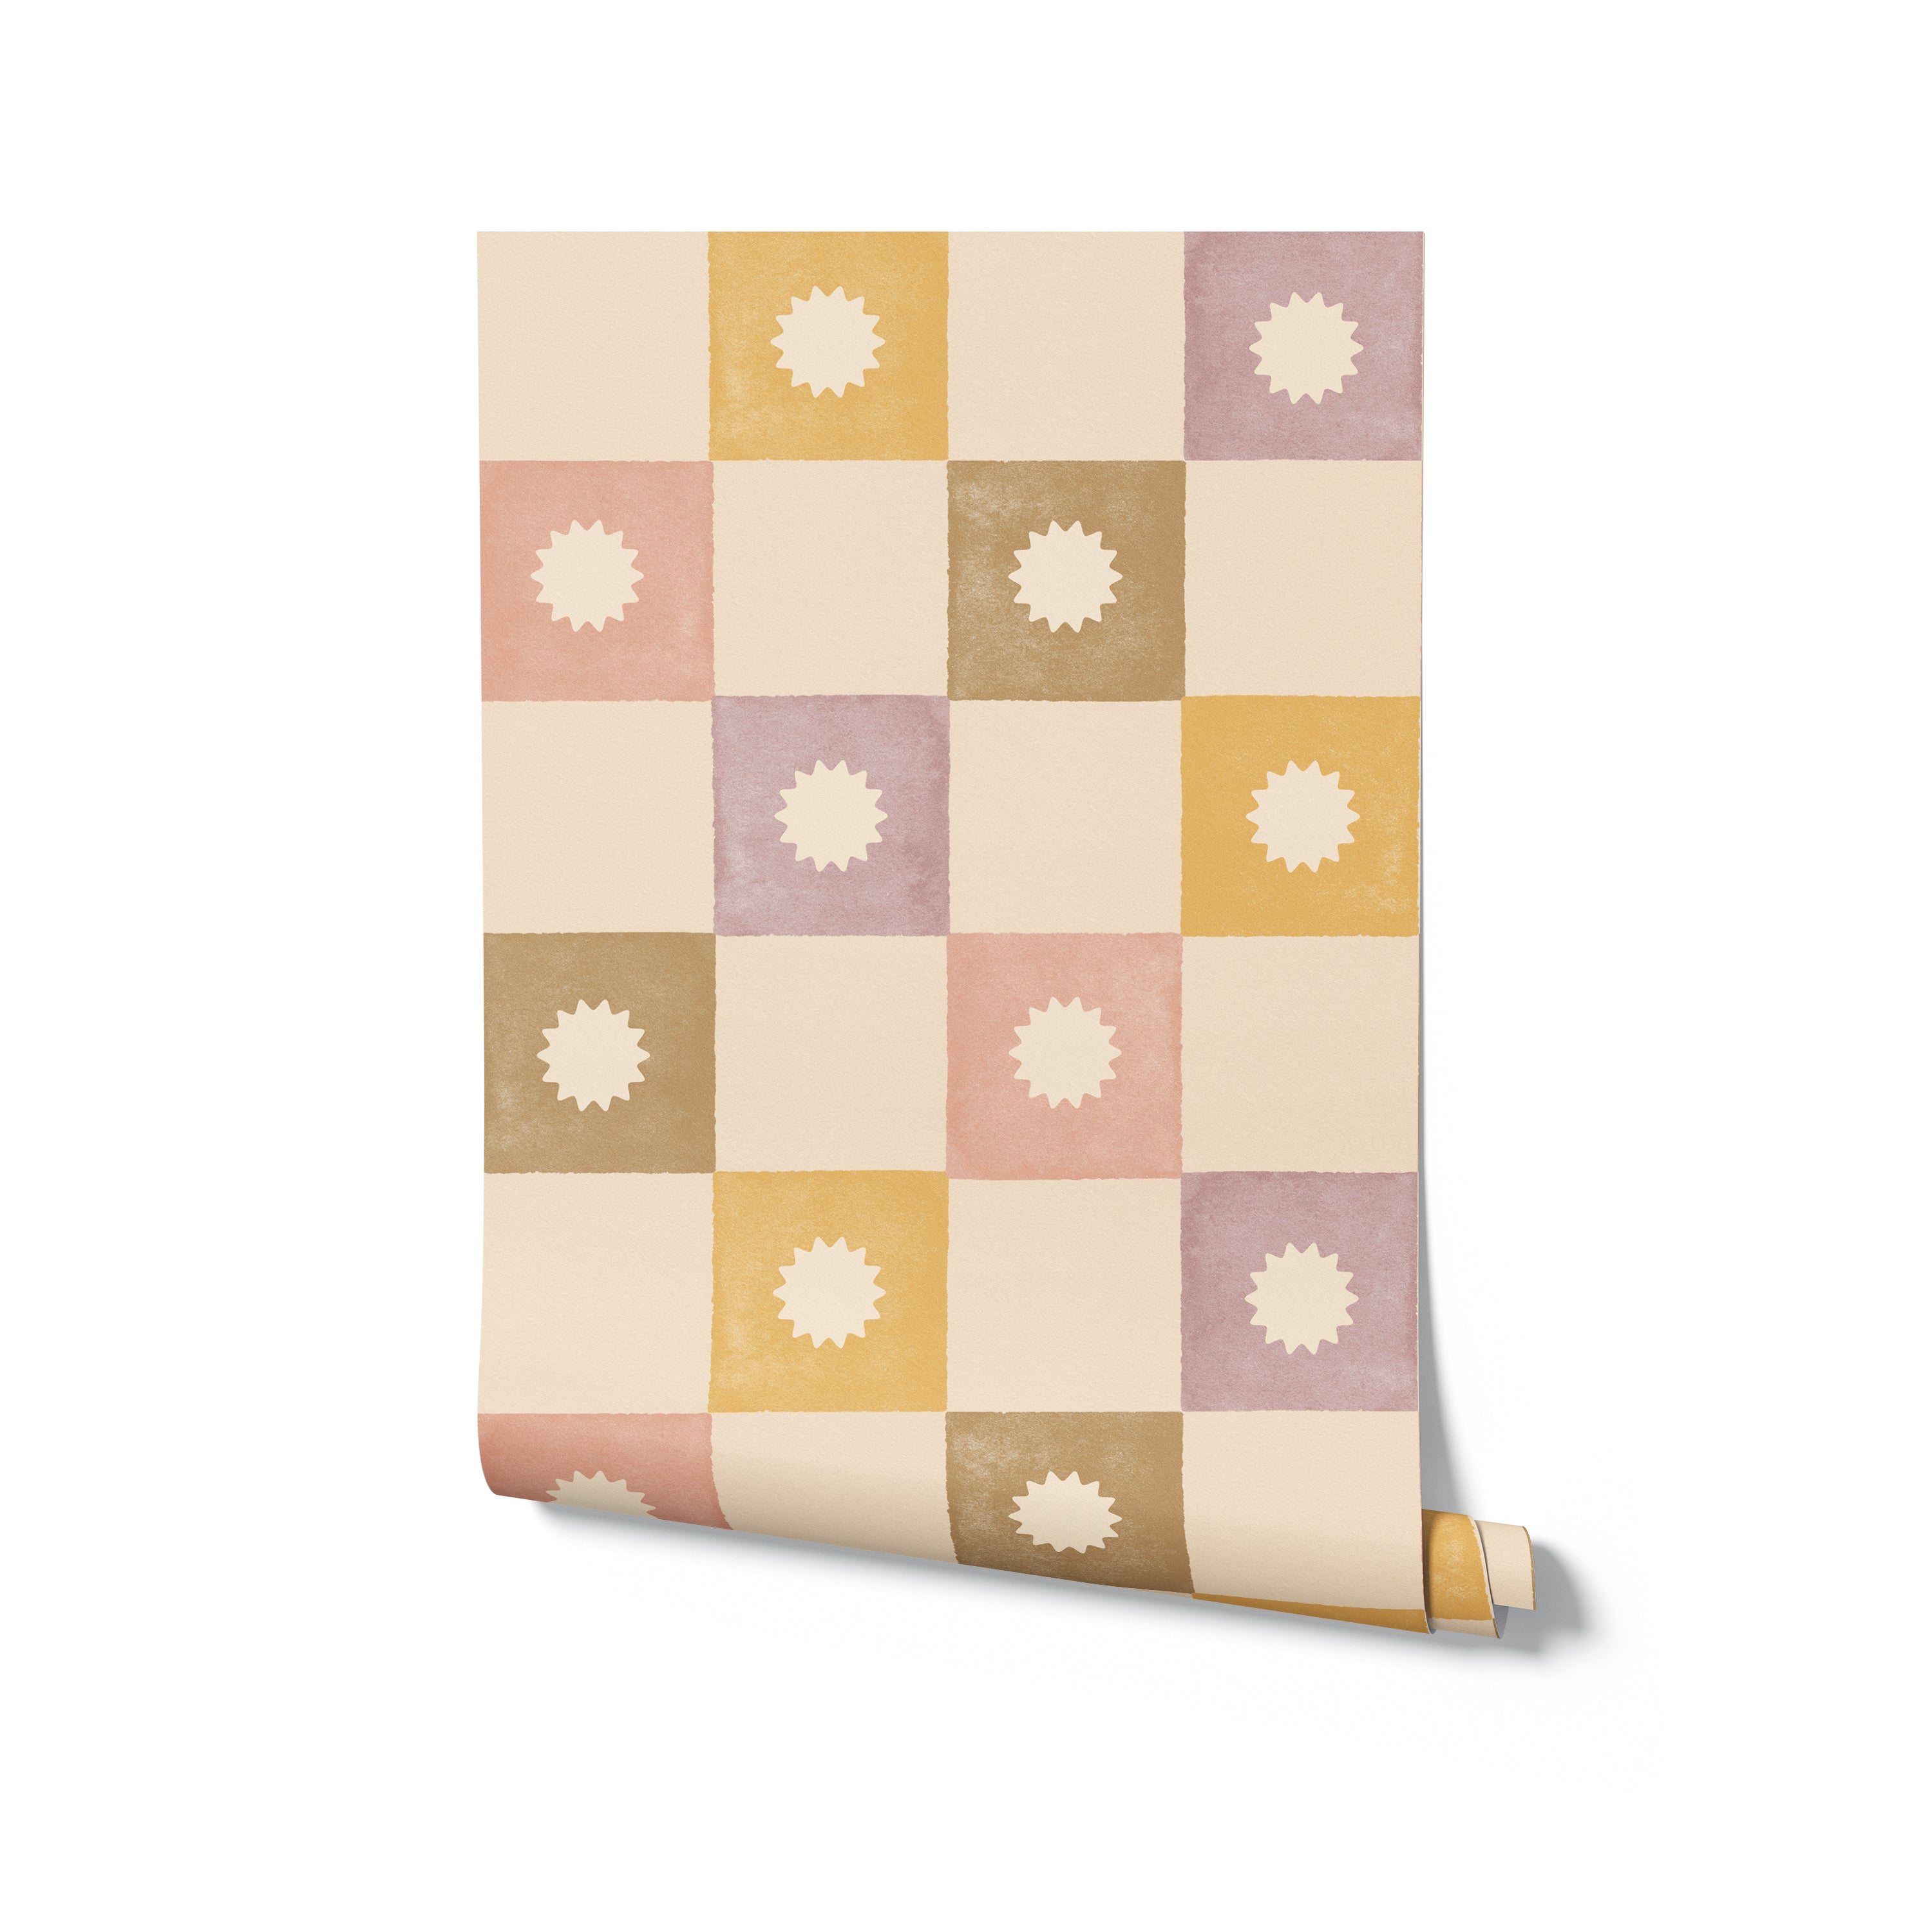 Rolled sample of Céline Wallpaper displaying a pastel checkered pattern with delicate sunburst motifs in muted tones of cream, pink, mustard, and taupe, ideal for adding a touch of sophisticated charm to any room.